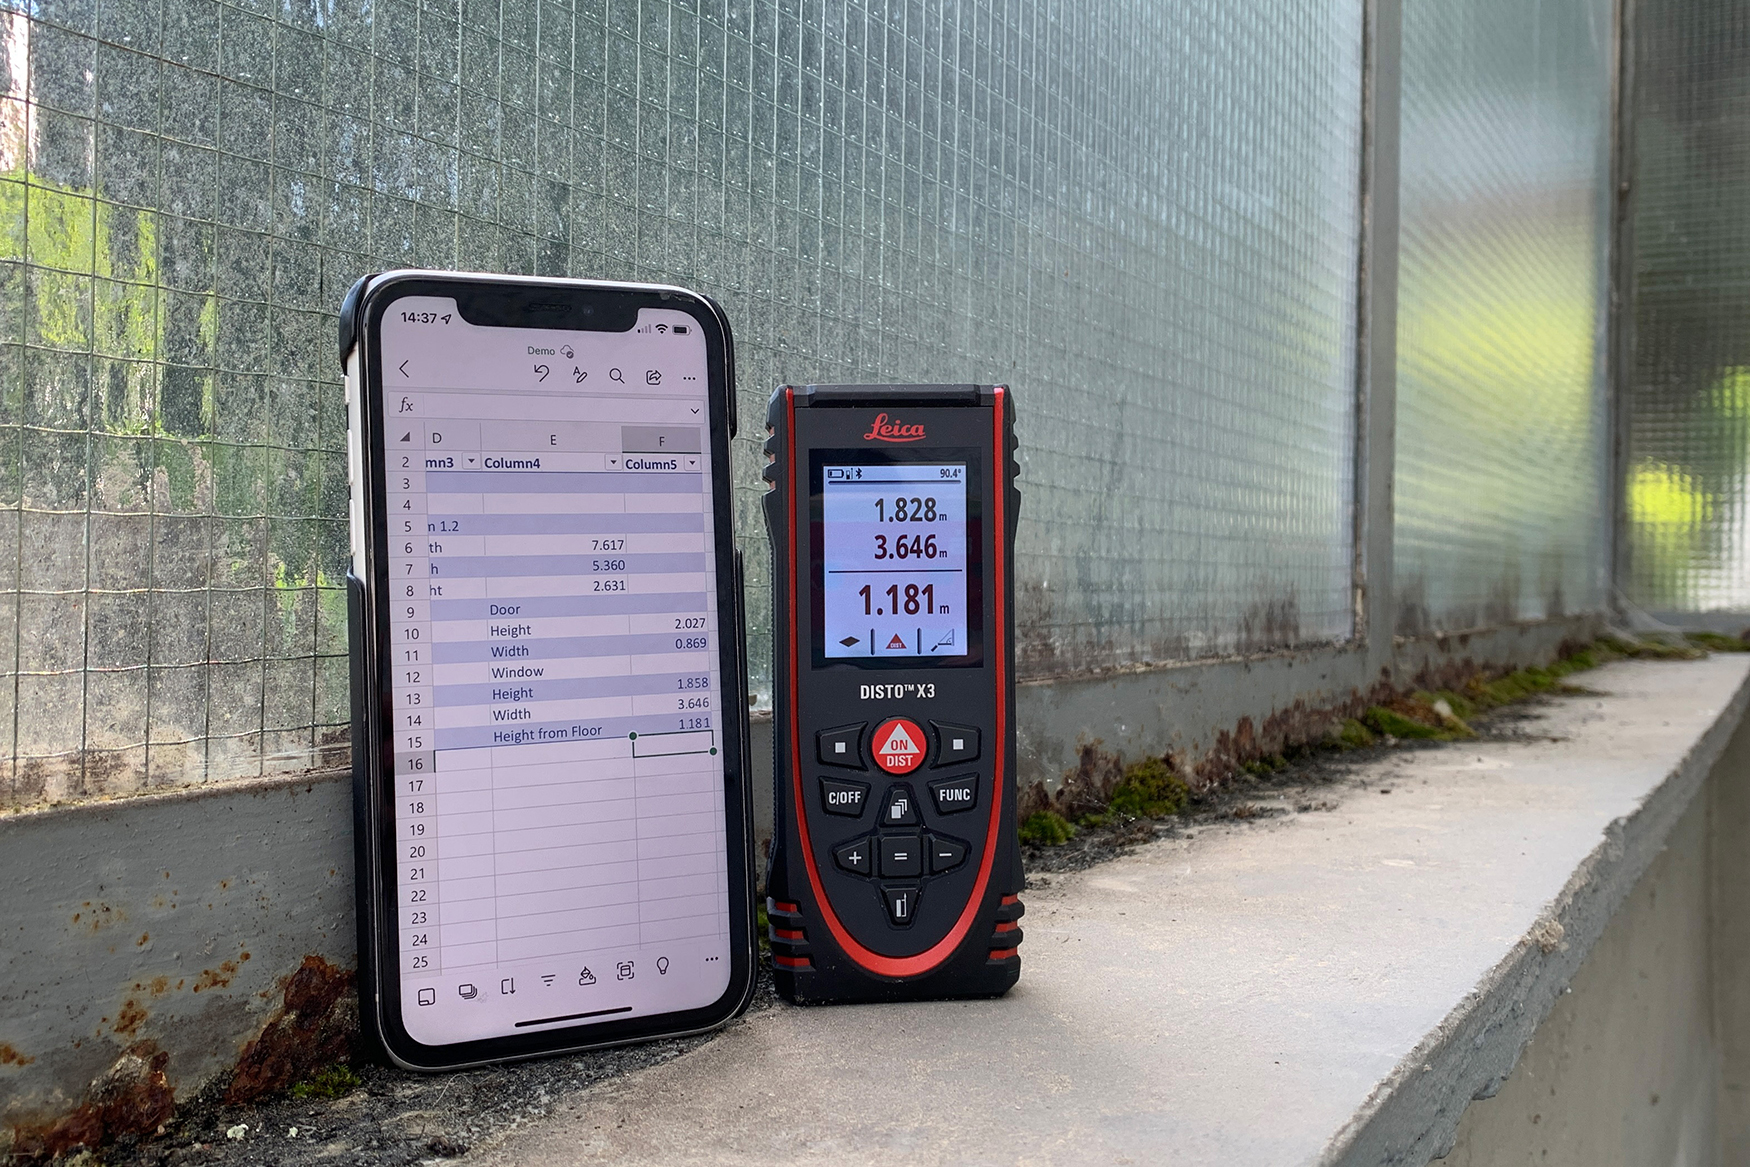 Leica DISTO X3 laser measure with measurement results in the display. The same measurement results appear in the table on the smart phone 